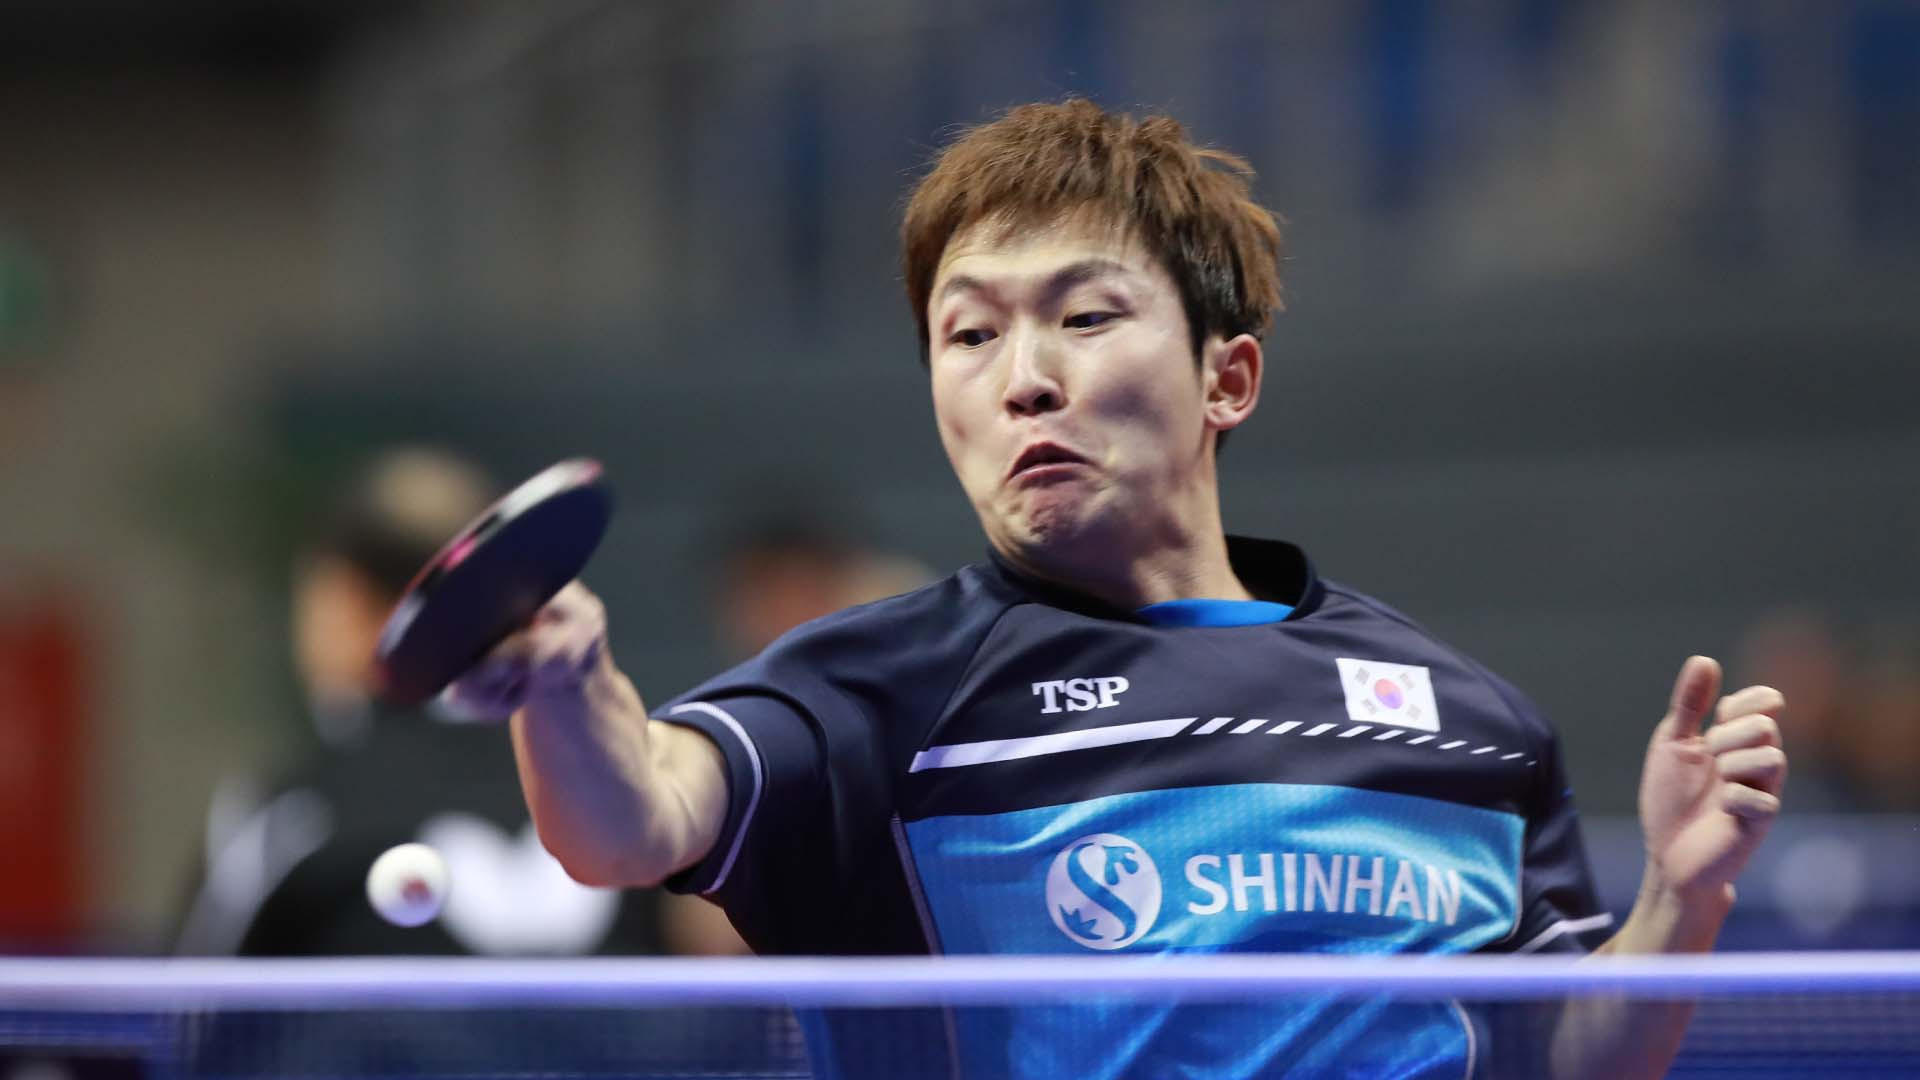 South Korea's Jeong Sangeun has suffered a shock defeat on home soil in qualifying for the Korea Open ©ITTF